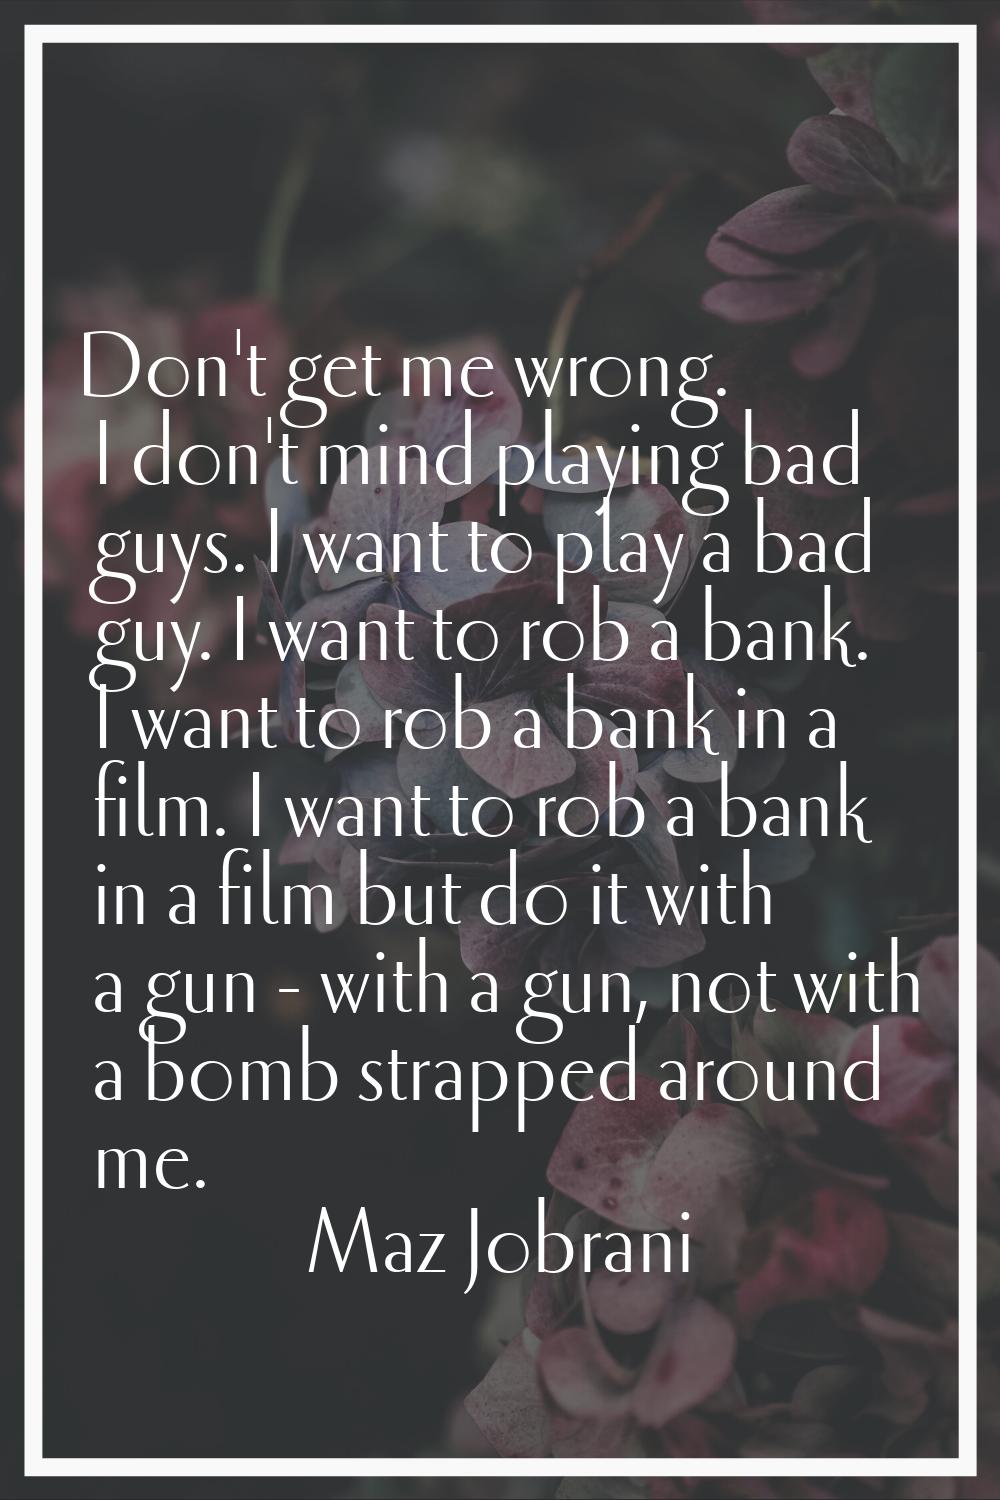 Don't get me wrong. I don't mind playing bad guys. I want to play a bad guy. I want to rob a bank. 